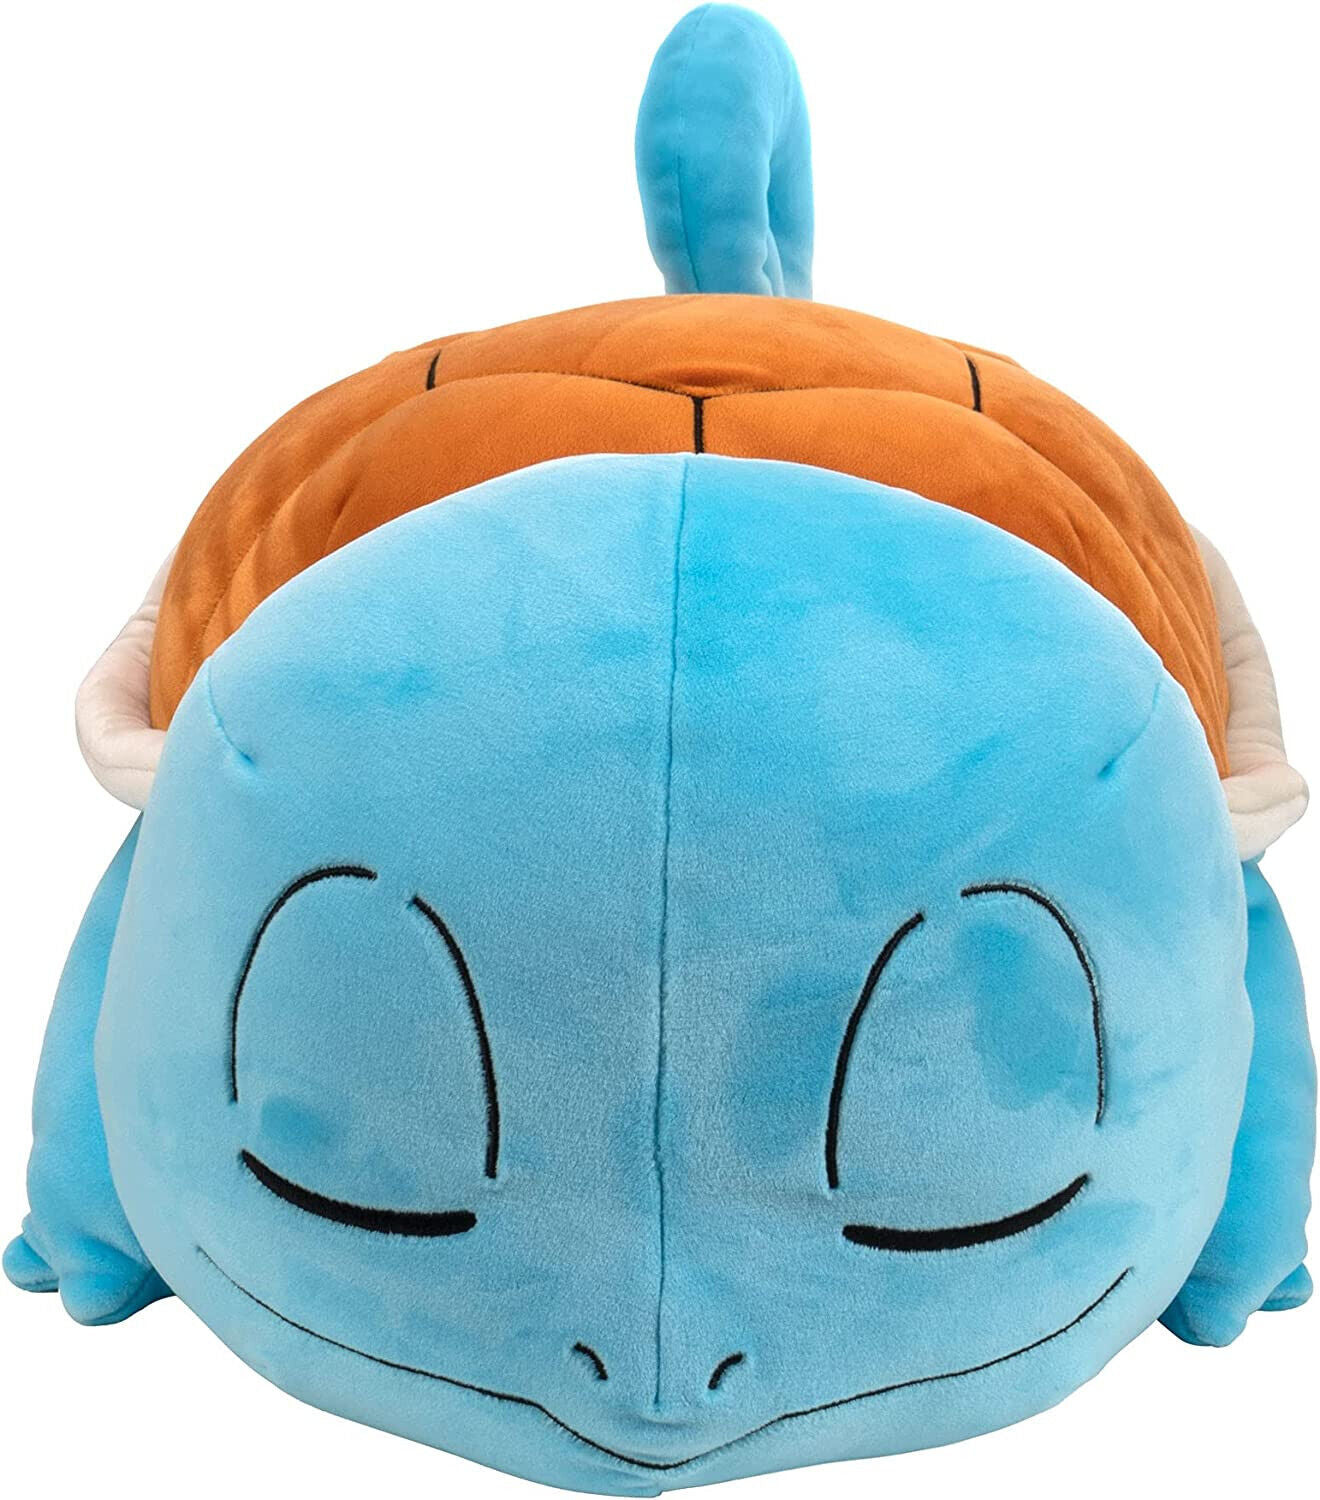 Official 2023 Must-Have! Huge 18" Pokemon Sleeping Bulbasaur Plush Toy